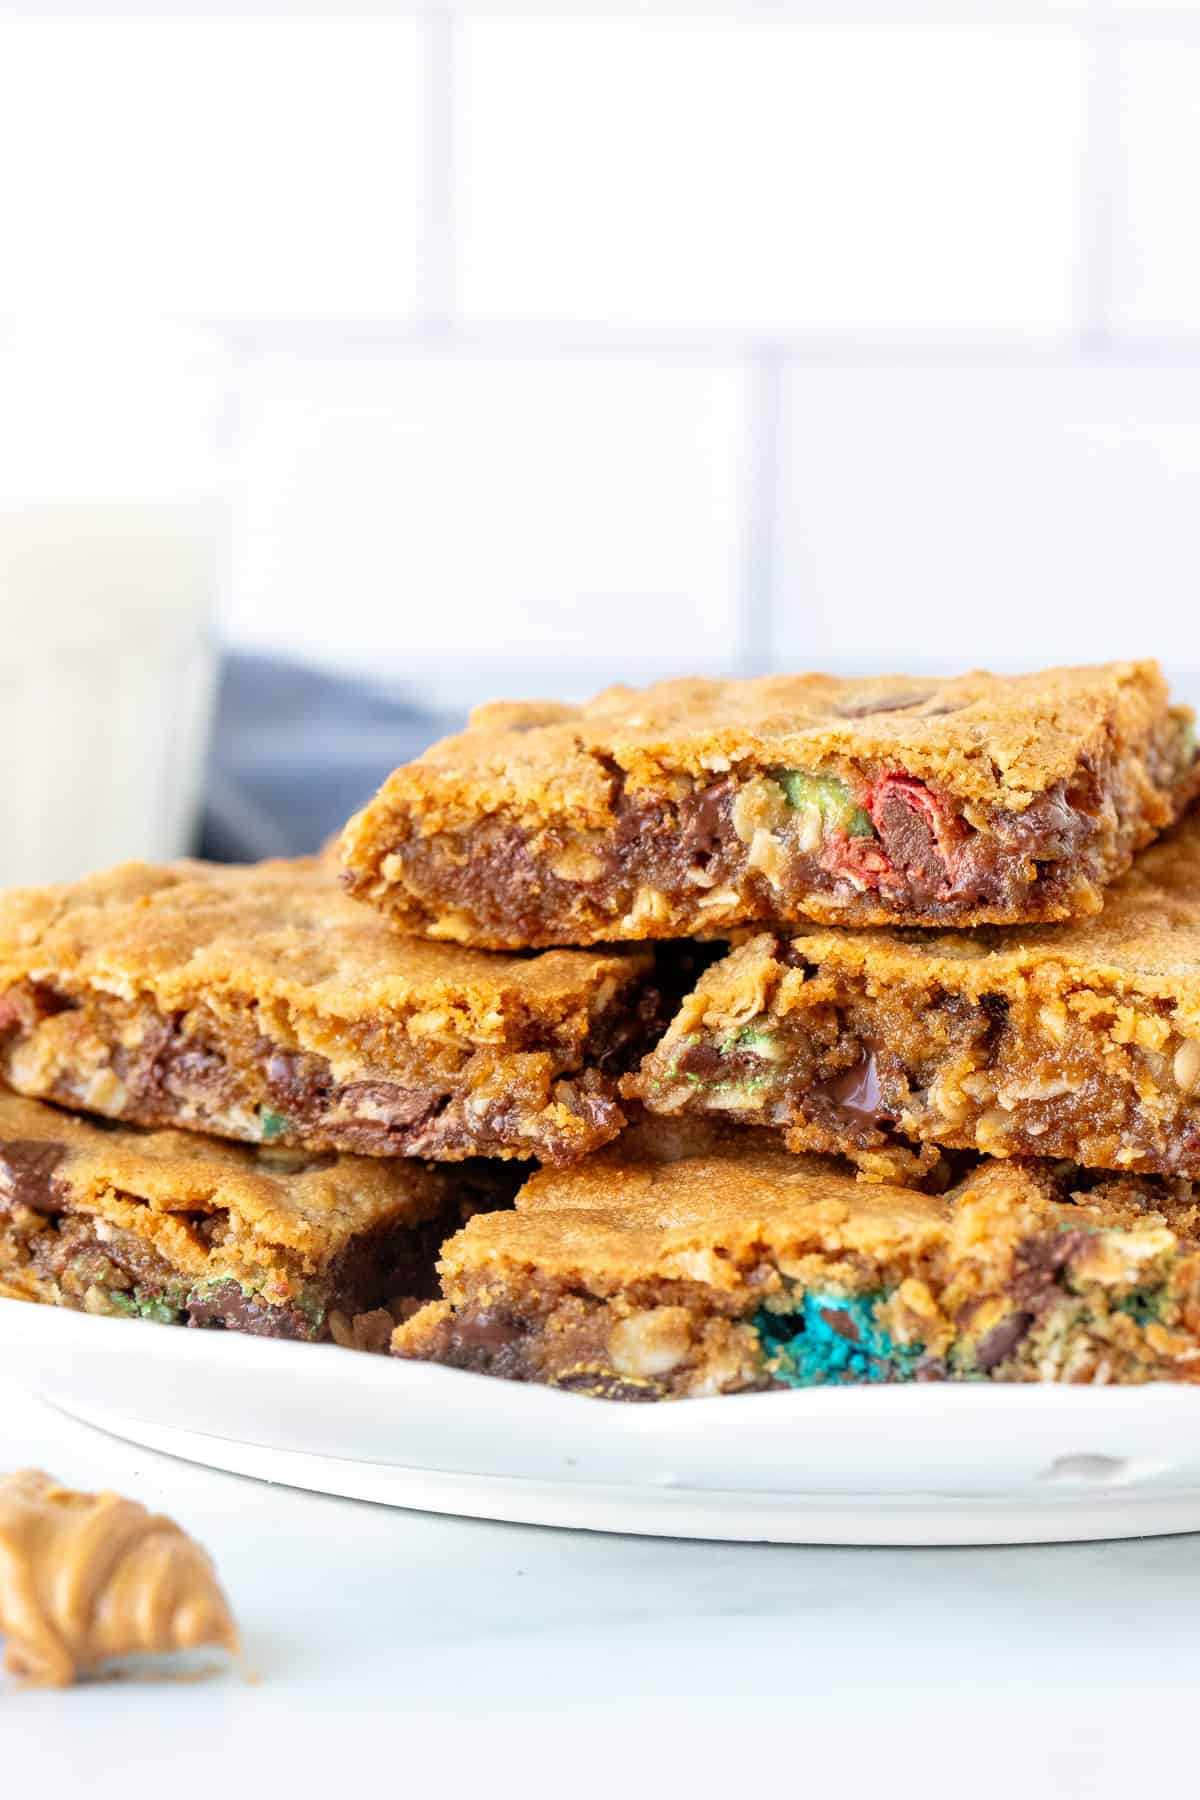 Plate of gooey peanut butter oatmeal cookie bars, piled on top of each other